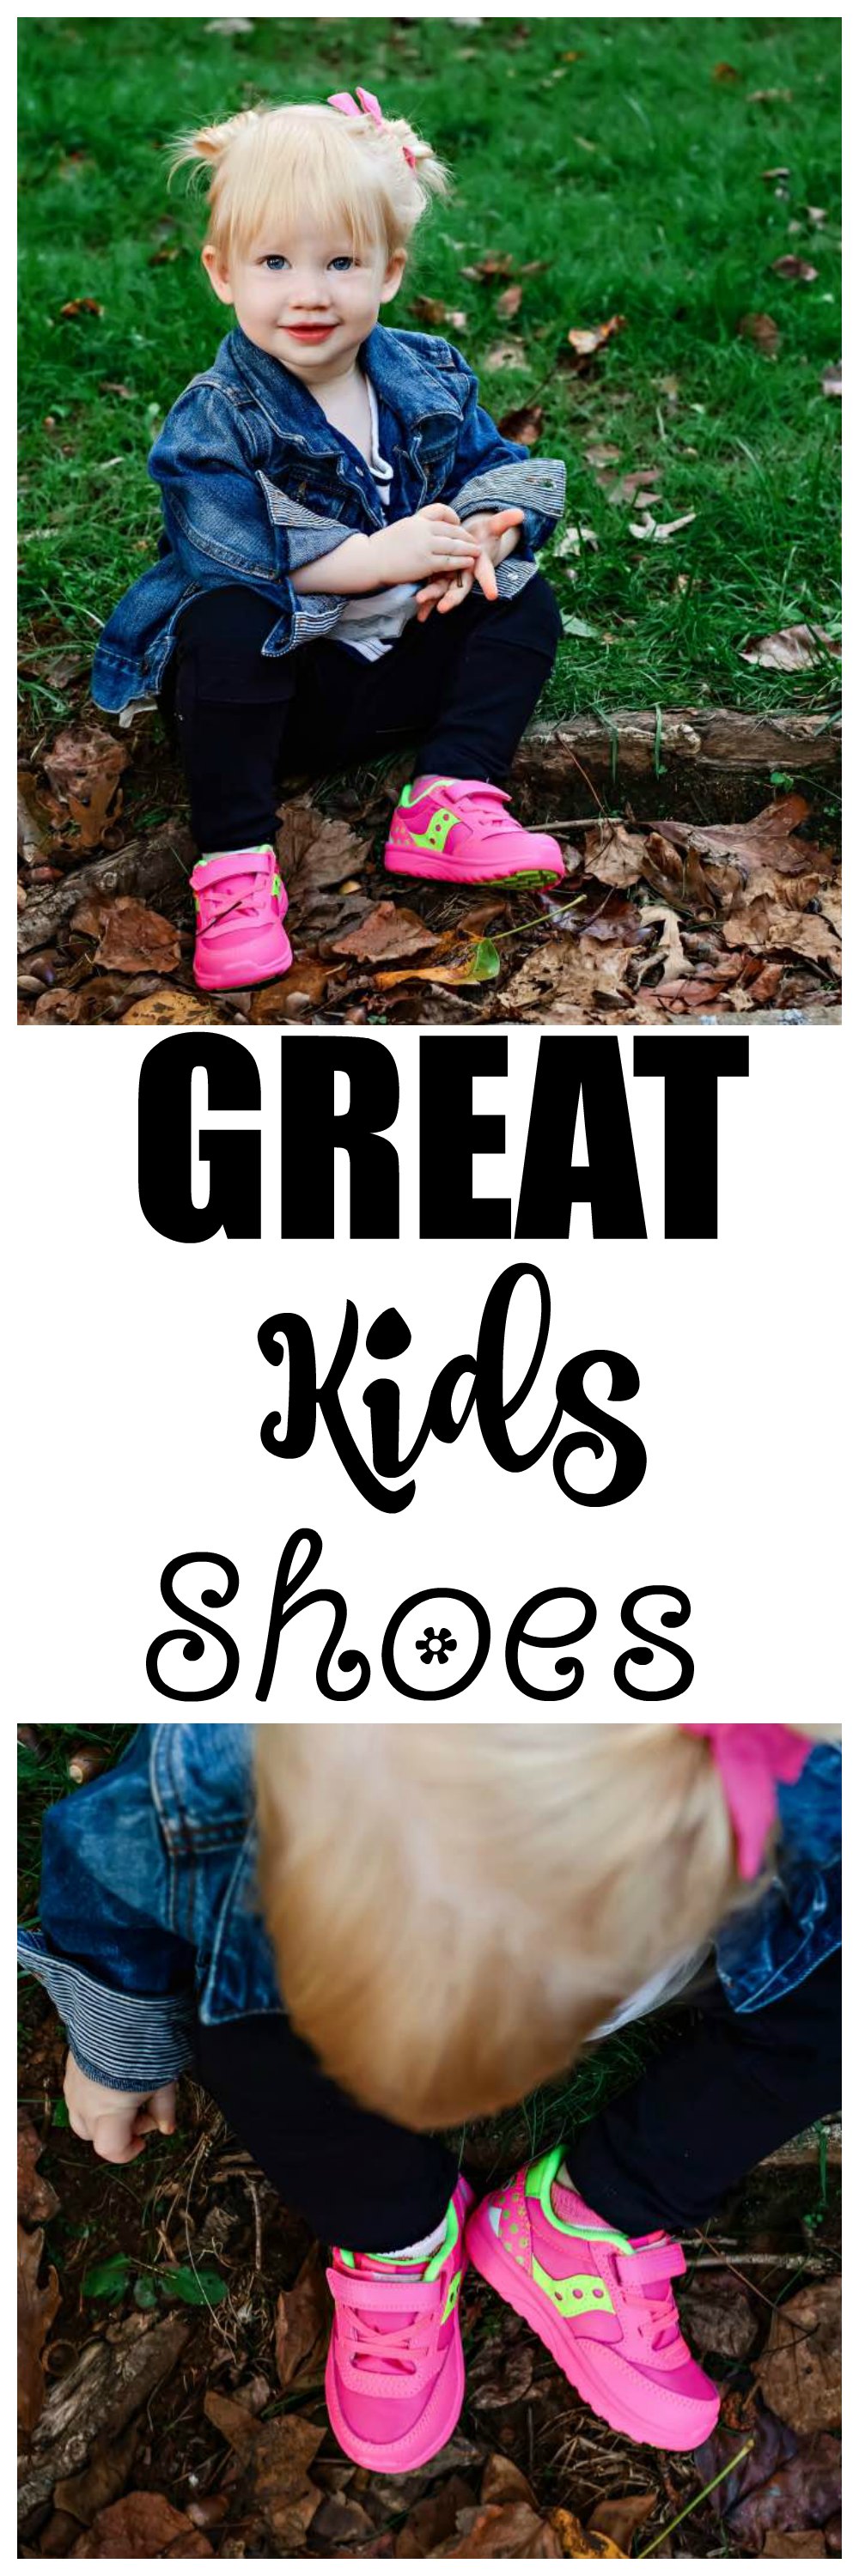 great kids shoes - Great Toddler Shoes for Girls by Atlanta mom blogger Happily Hughes